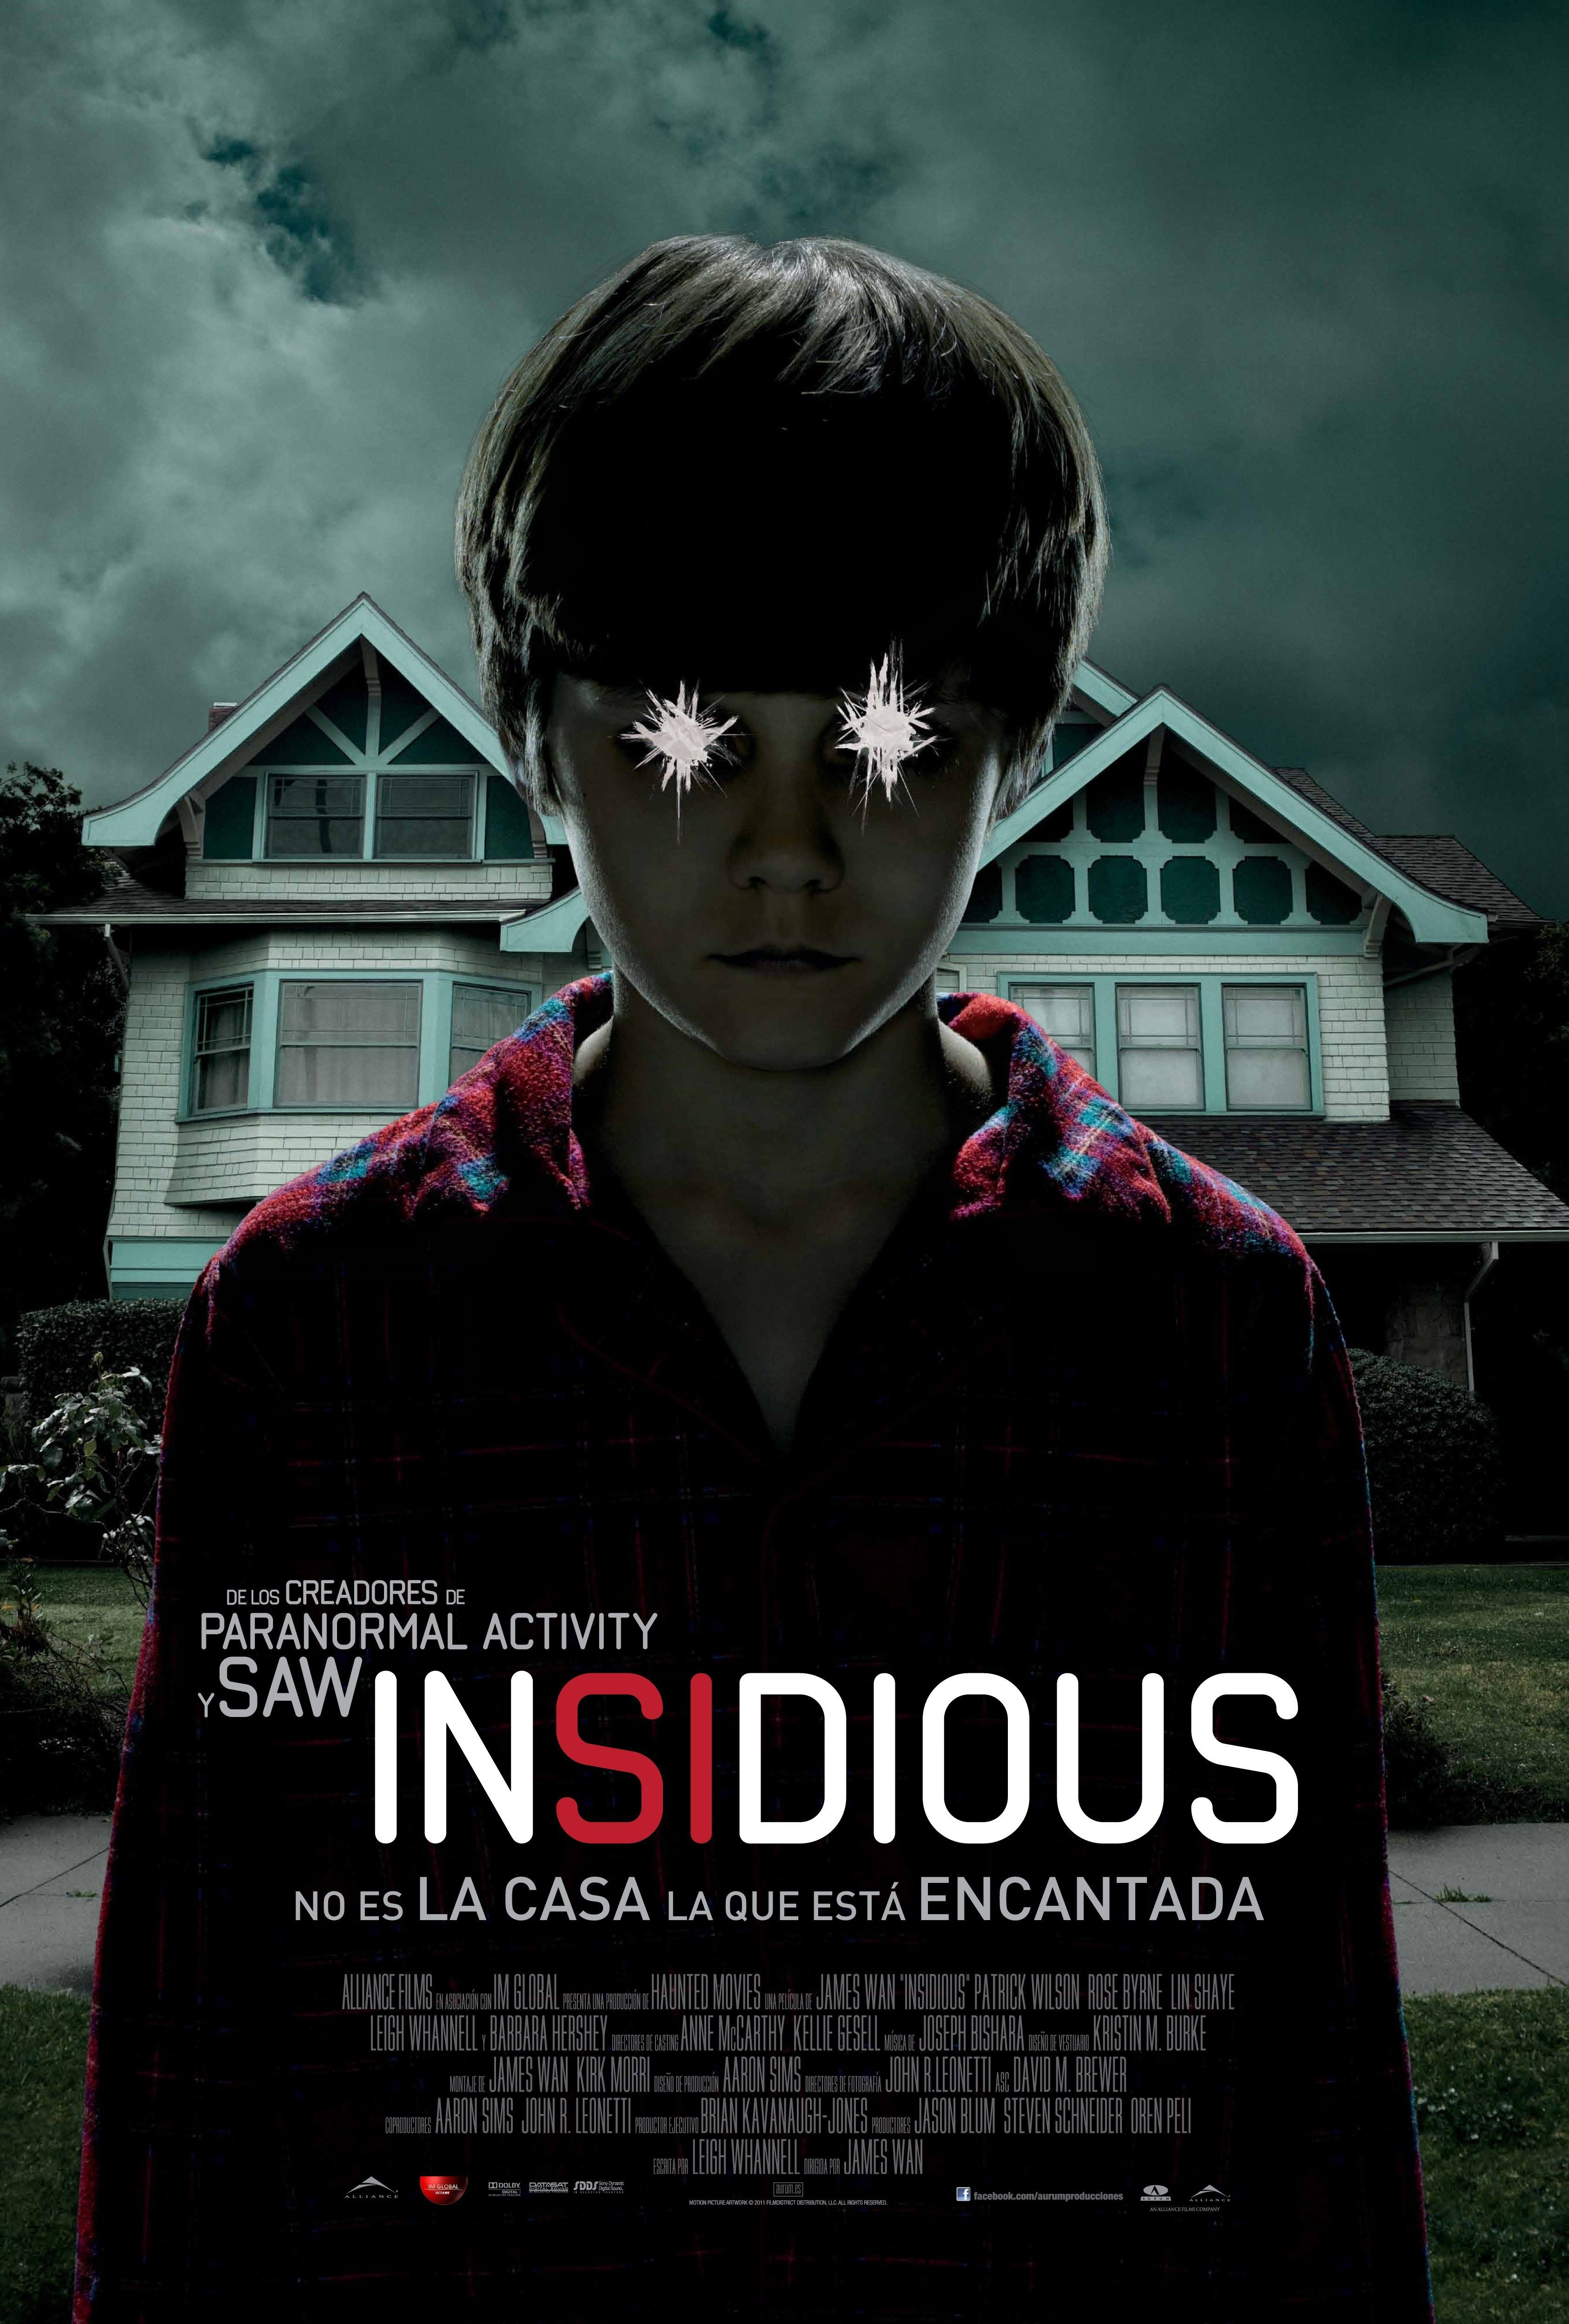 Watch Insidious 2 Online Streaming Free